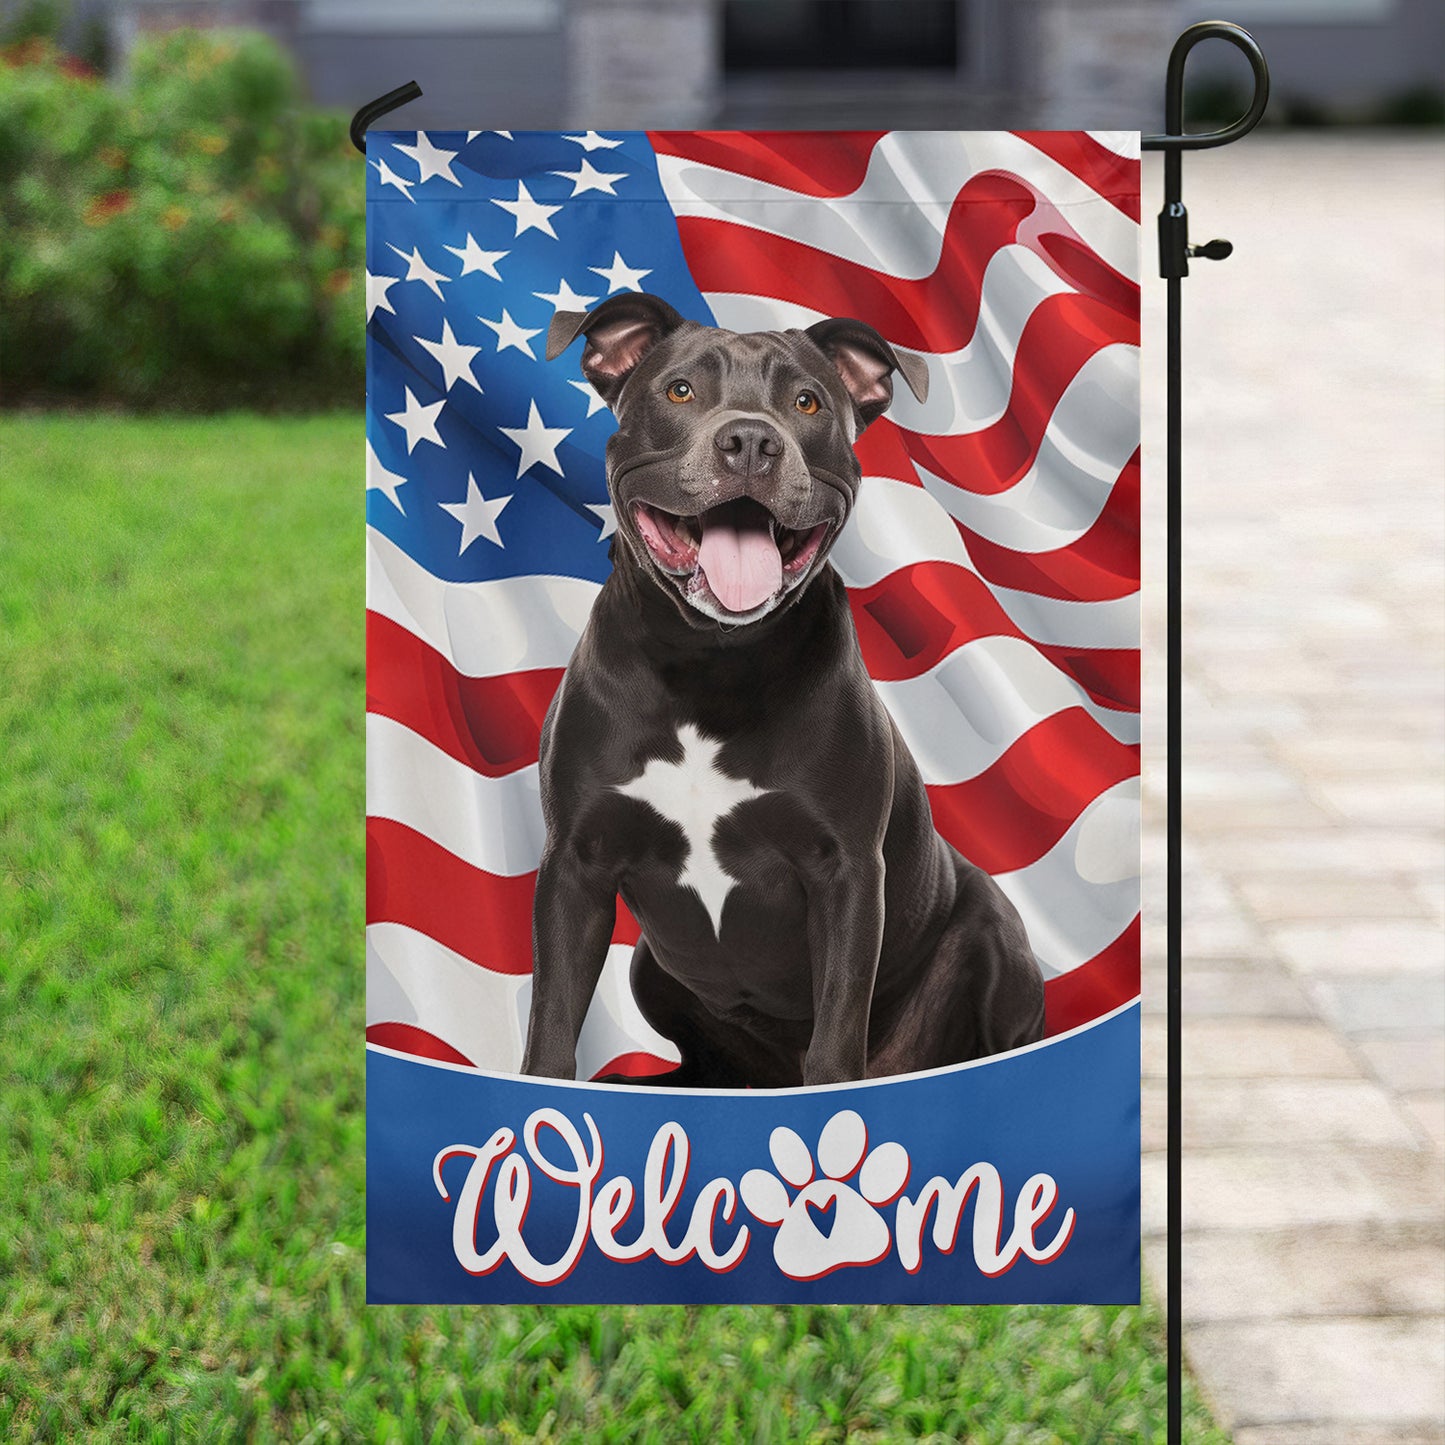 July 4th Pitbull Dog Garden Flag & House Flag, Welcome You, Independence Day Yard Flag Gift For Pitbull Dog Lovers, Dog Flags